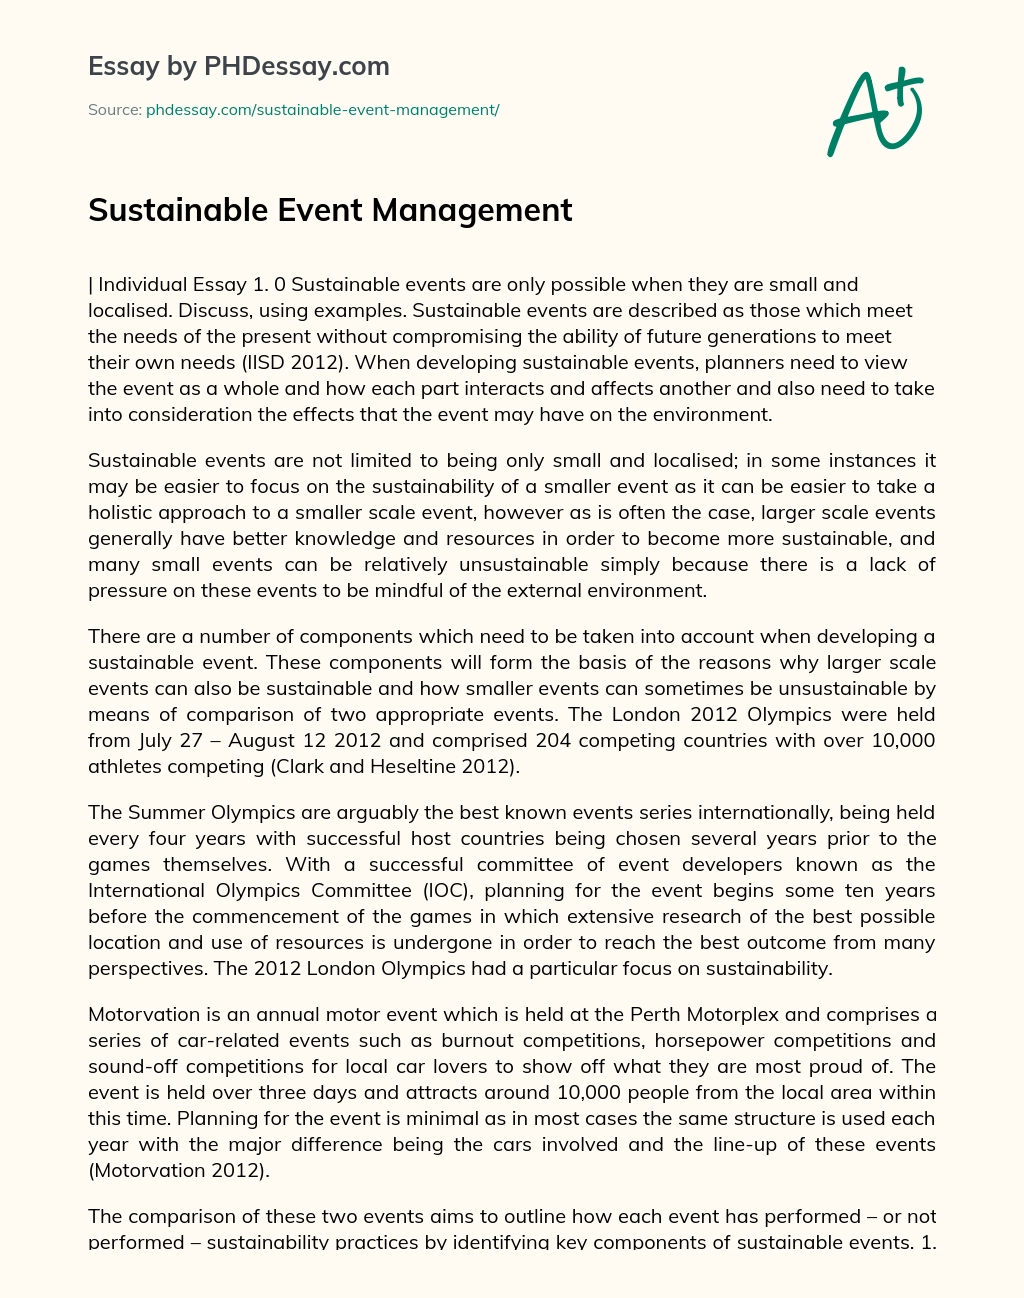 Sustainable Event Management essay